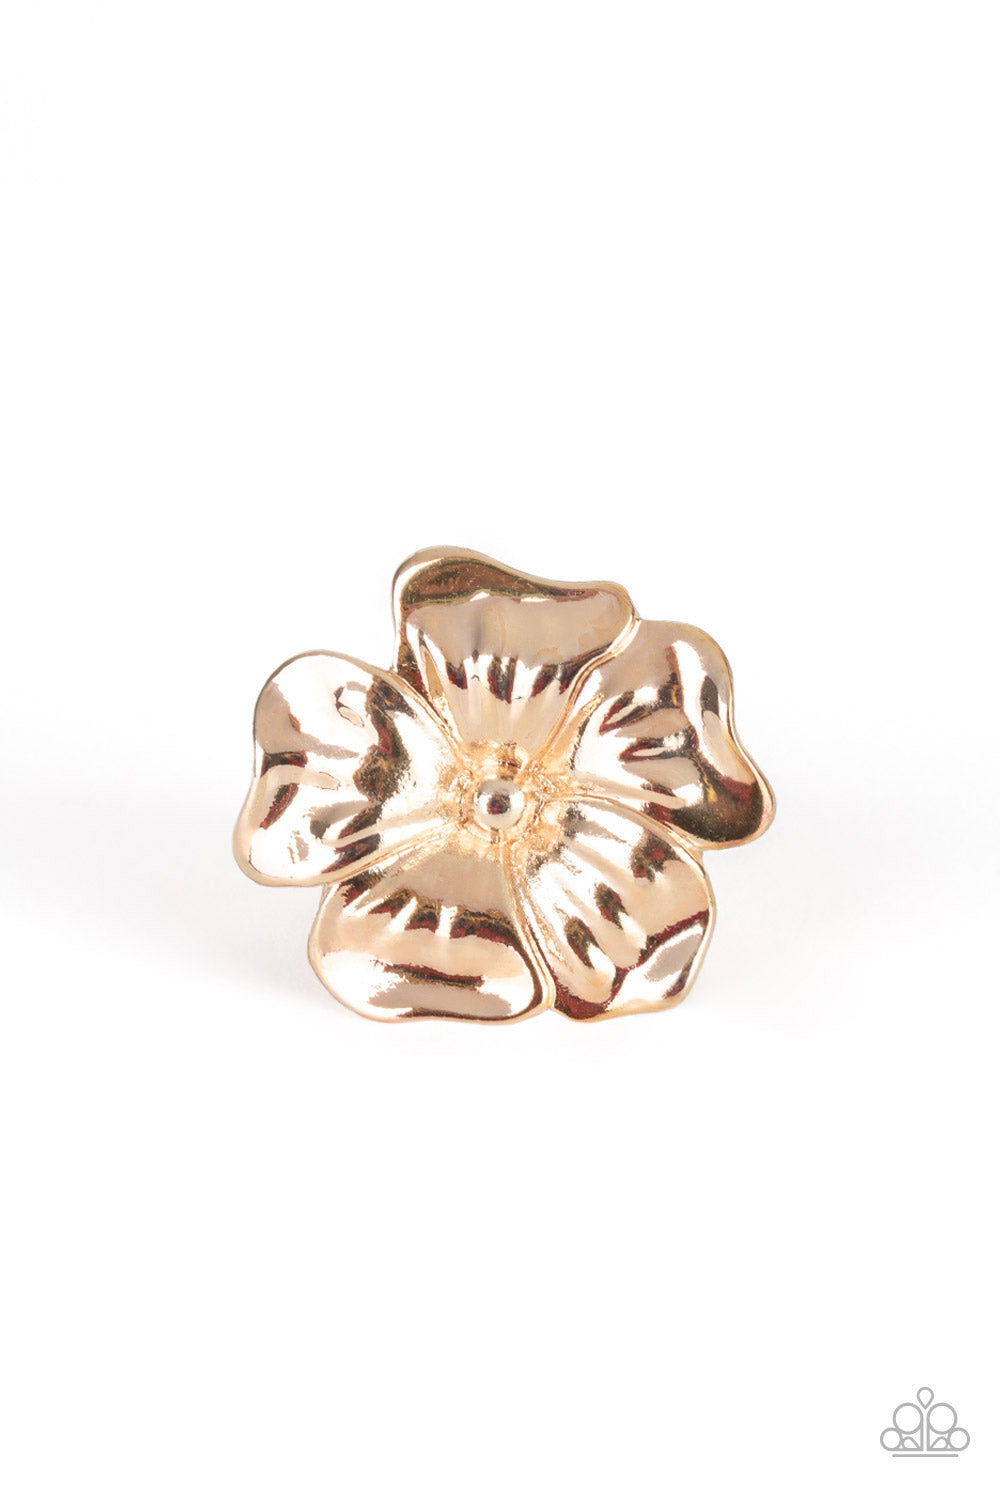 oak-sisters-jewelry-tropical-gardens-rose-gold-paparazzi-accessories-by-lisa